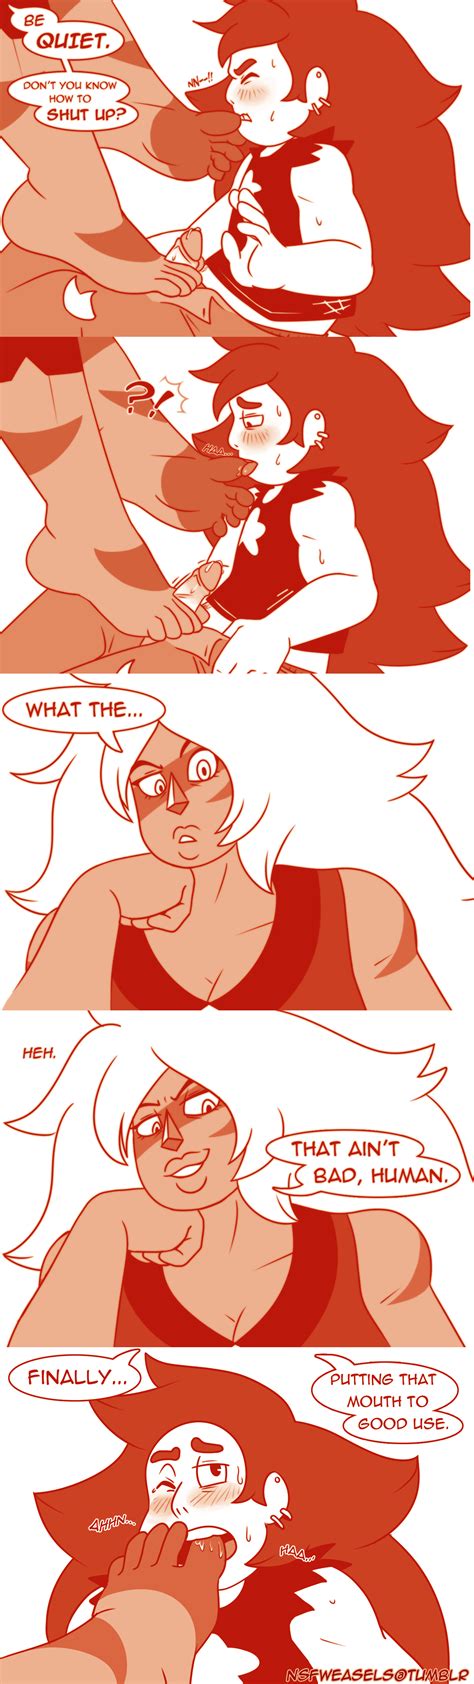 1838441 greg universe jasper steven universe western hentai pictures pictures tag